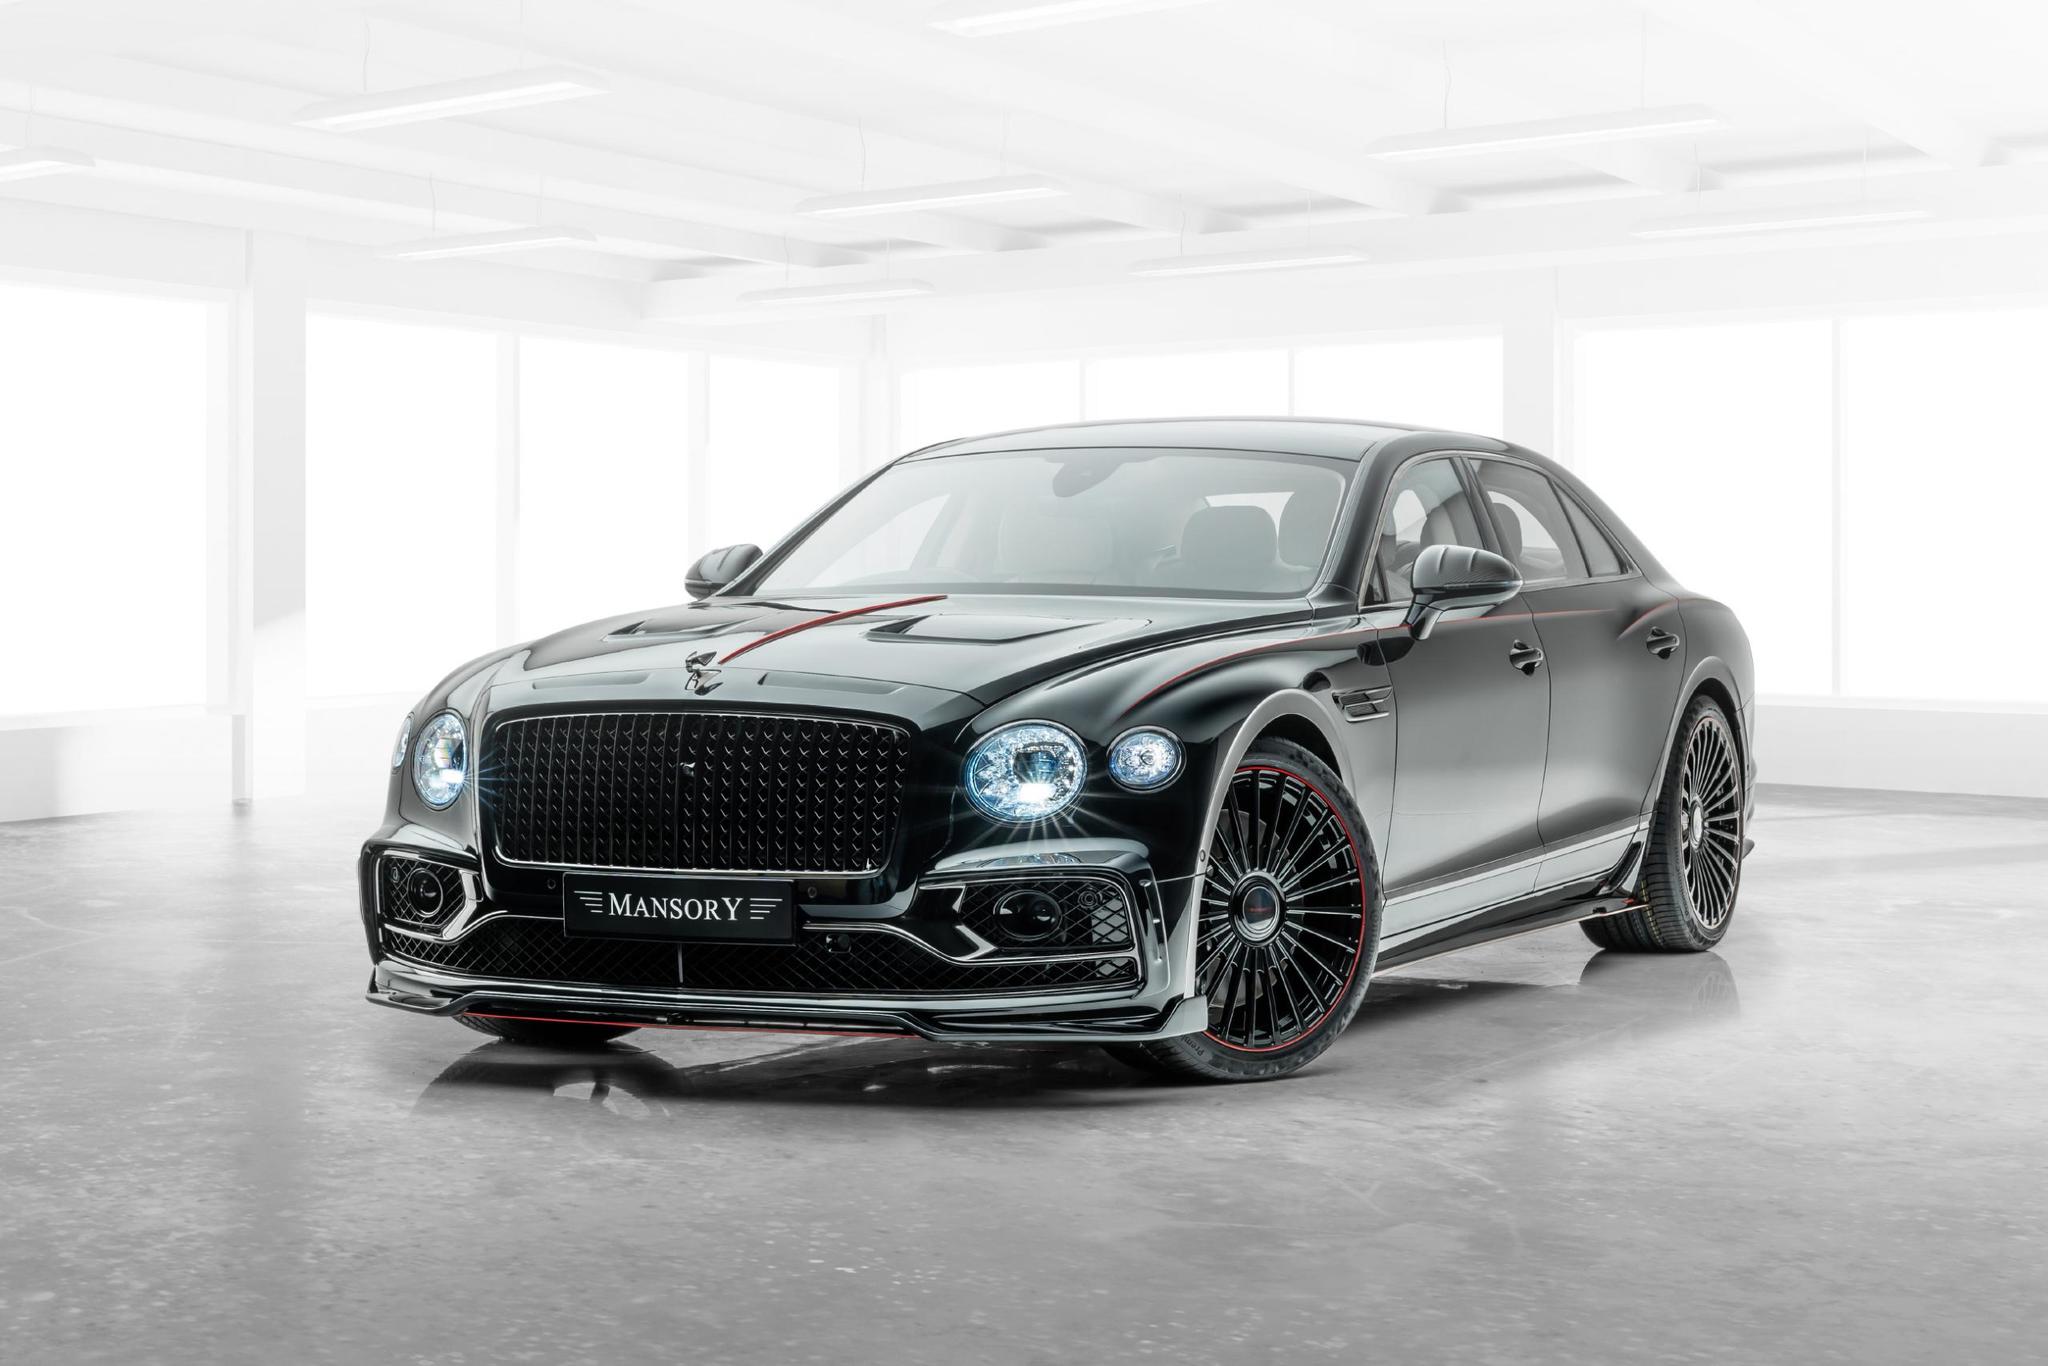 Mansory Carbon Fiber Body kit set for Bentley New Flying Spur Buy with